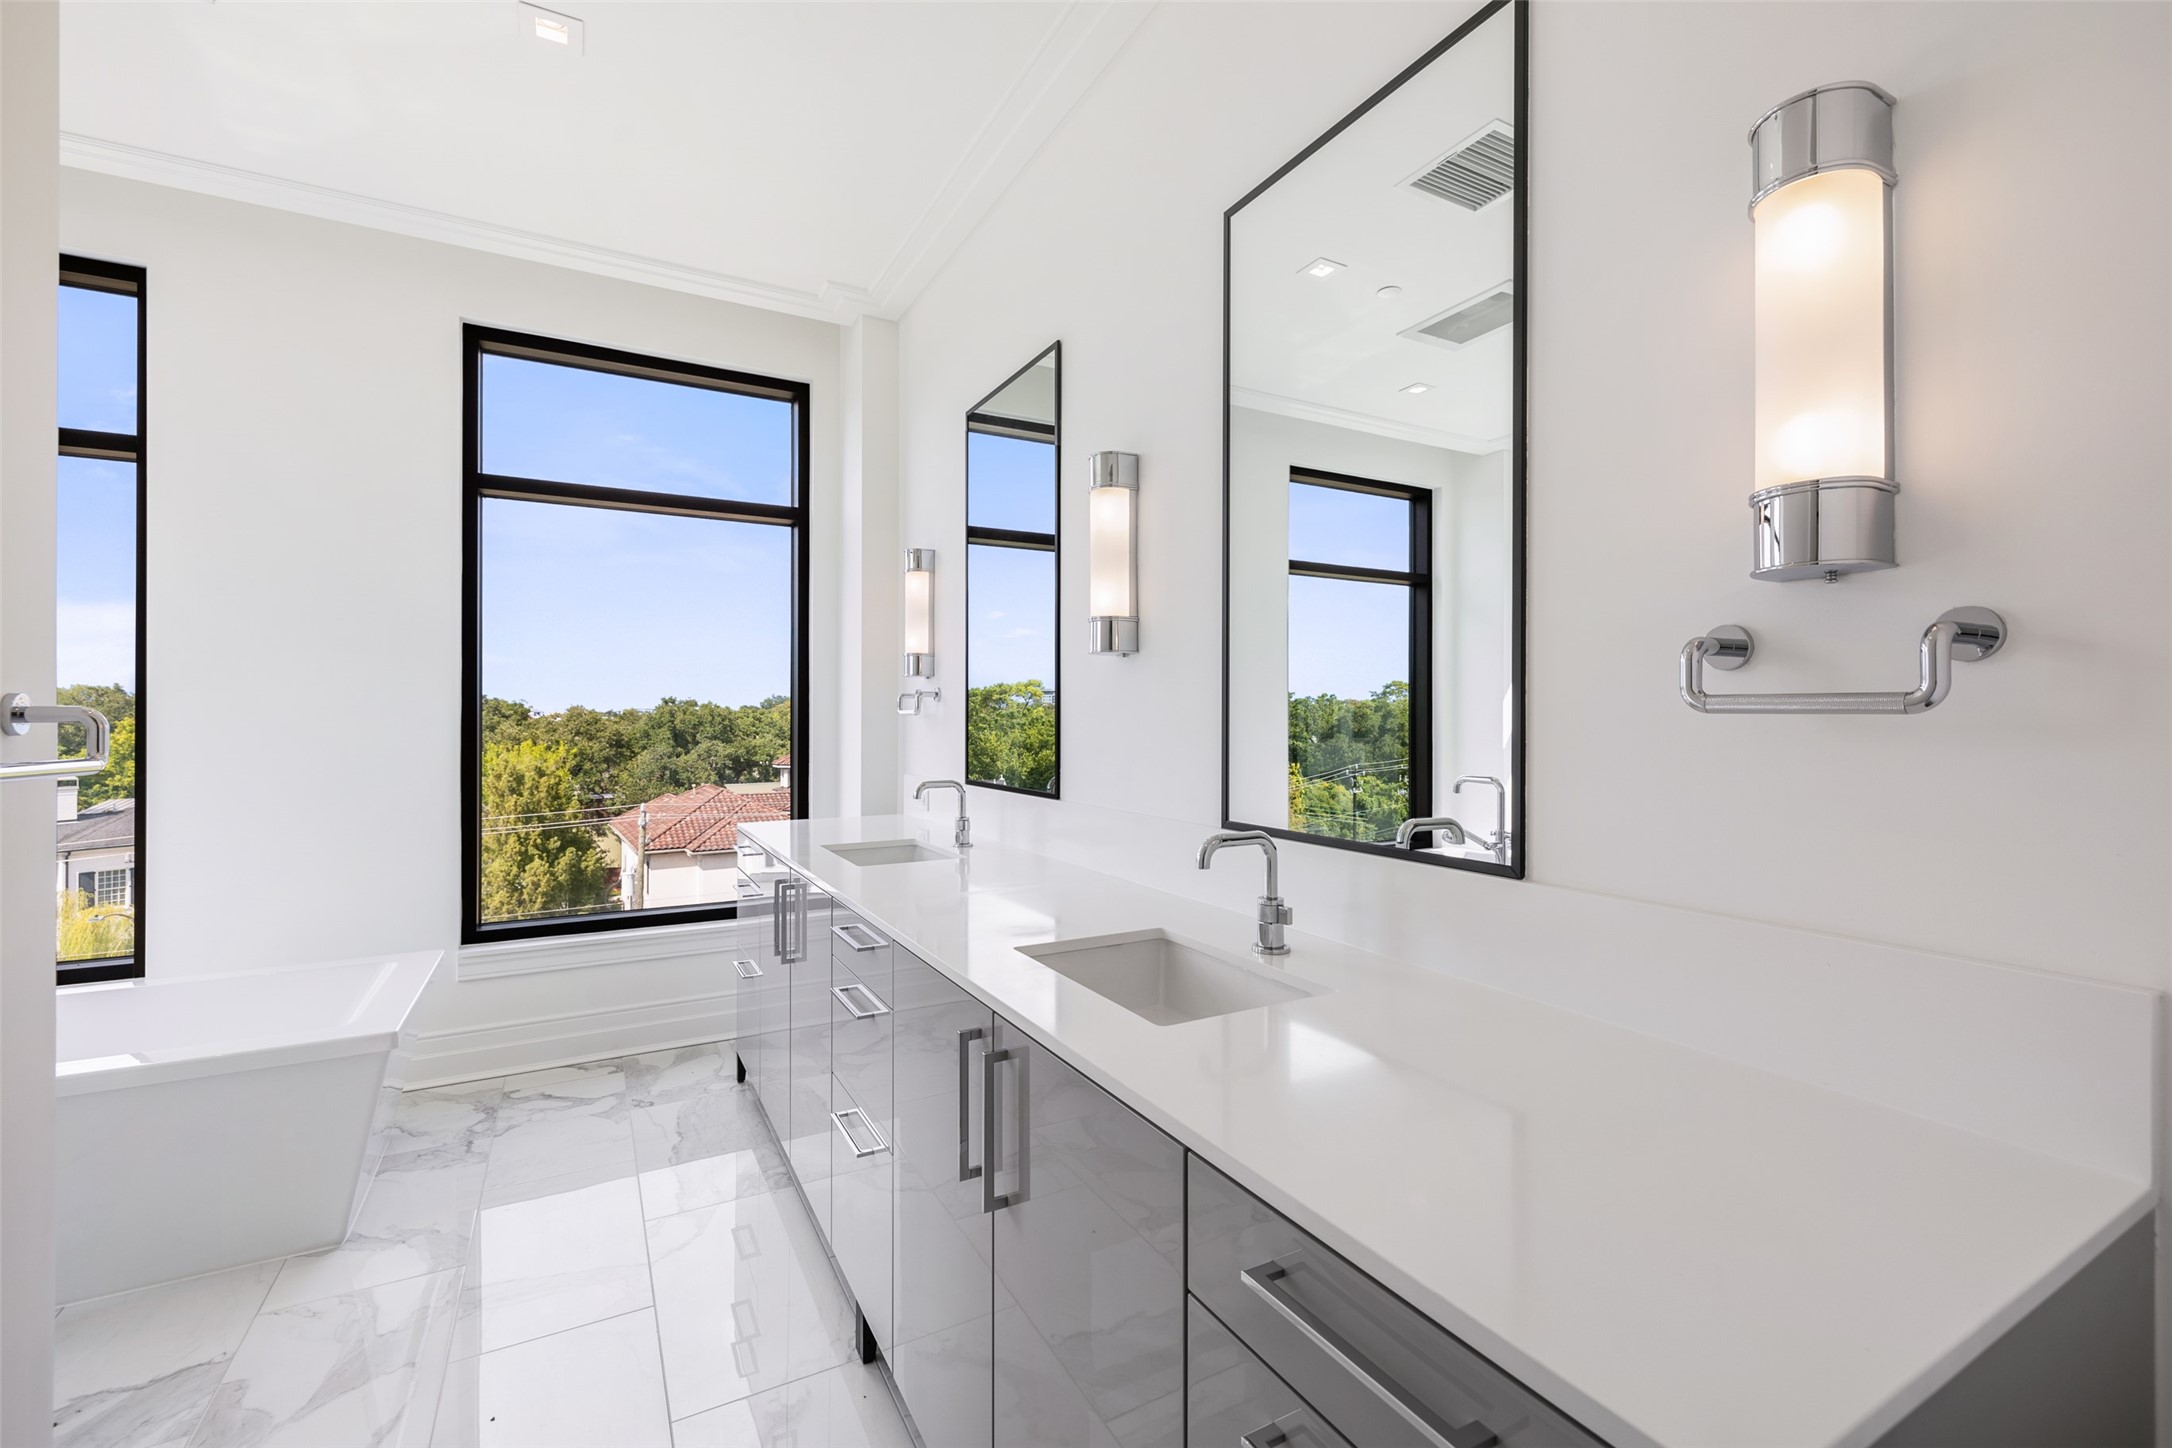 Primary Bathroom with Quartz Countertops has so much natural light.